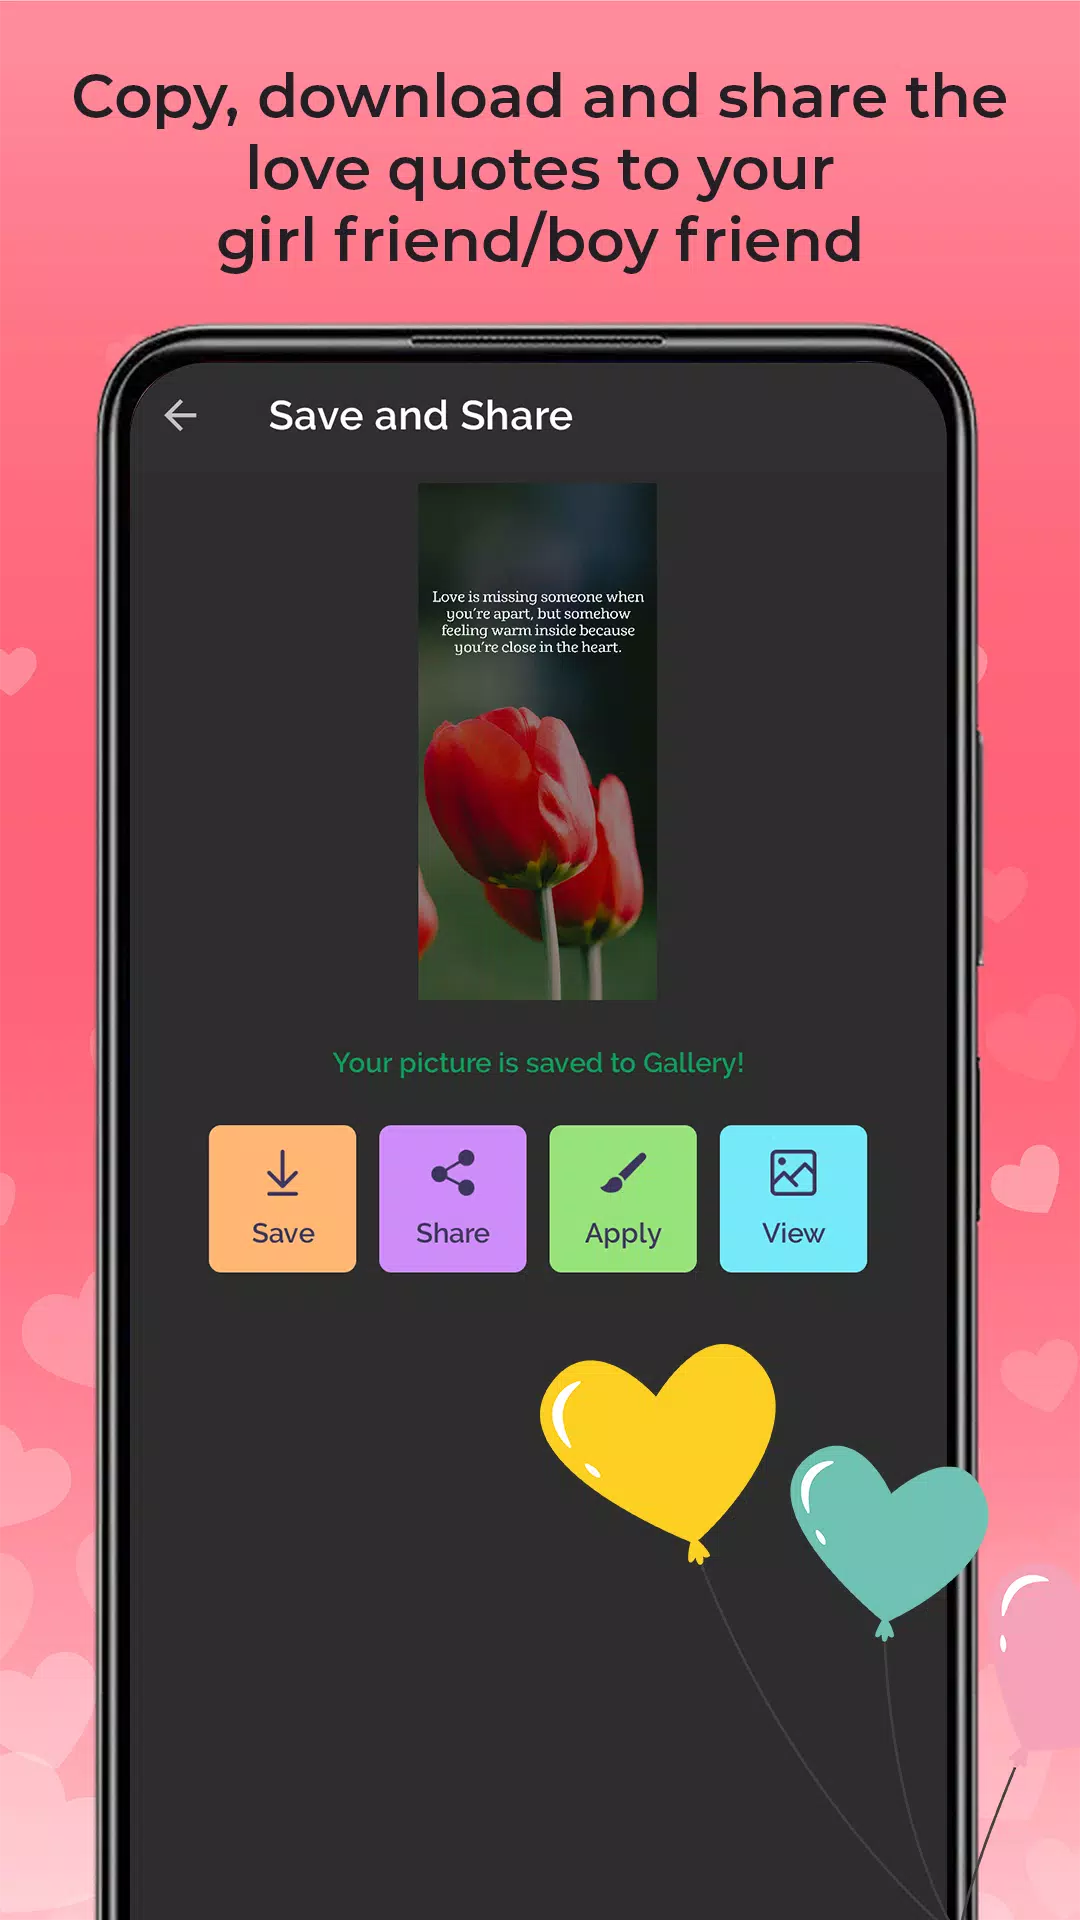 Download wisdom love friendship quote Free for Android - wisdom love  friendship quote APK Download 